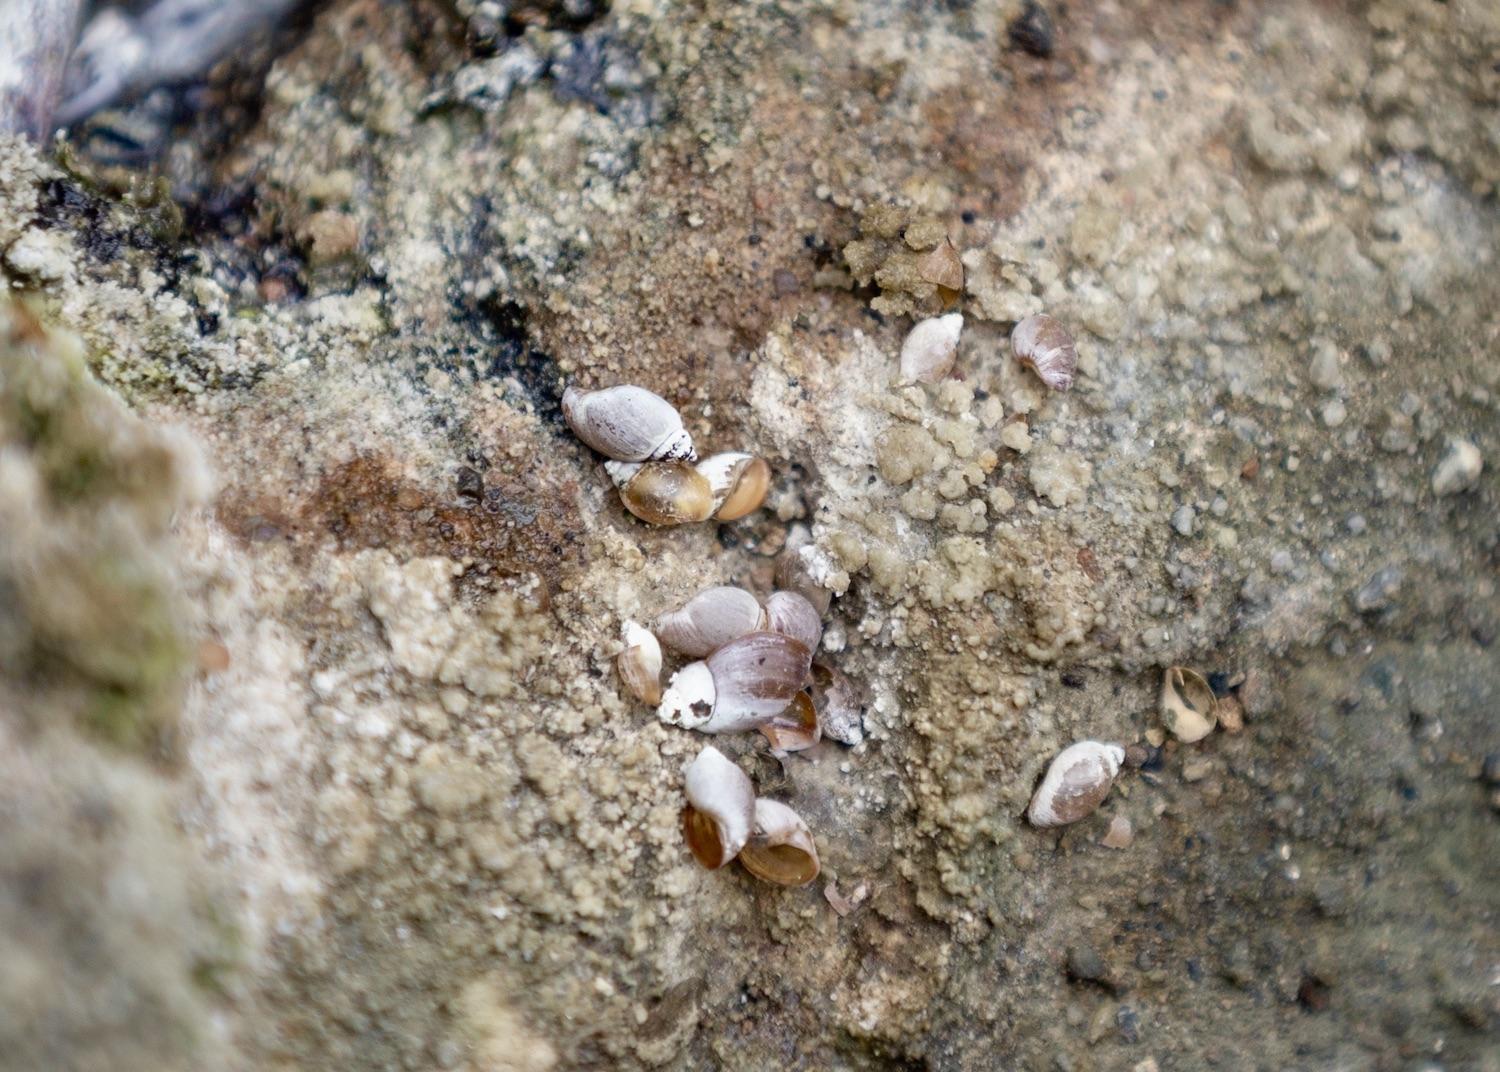 Endangered Banff Springs Snails are a small, globe-shaped aquatic snail with a shell length of up to 11 millimetres (0.4 inches) that coils to the left.